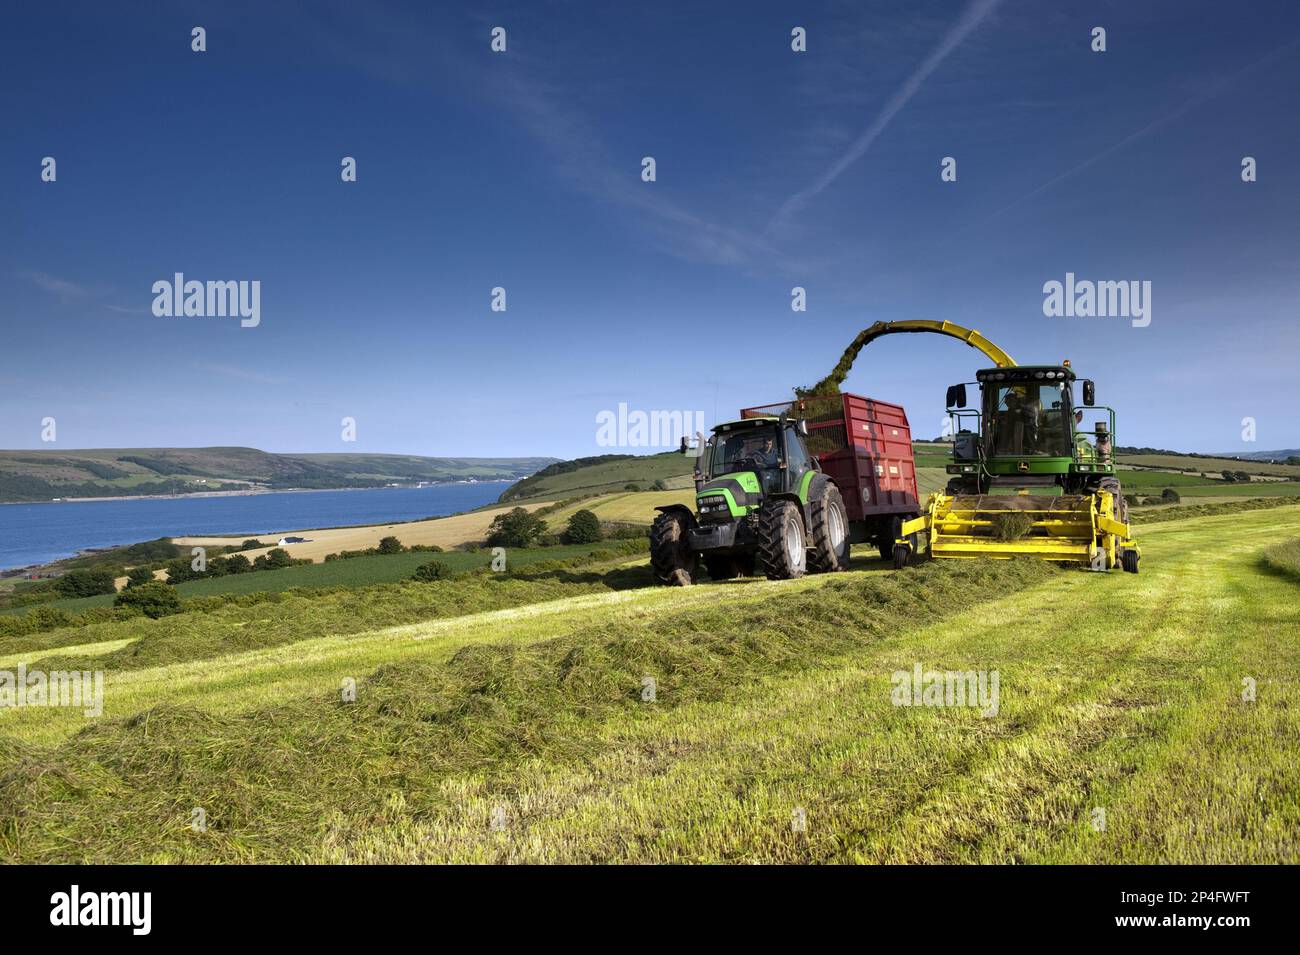 John Deere self-propelled forage harvester, tractor and trailer, grass for silage harvesting, Loch Ryan, Dumfries and Galloway, Scotland, United Stock Photo